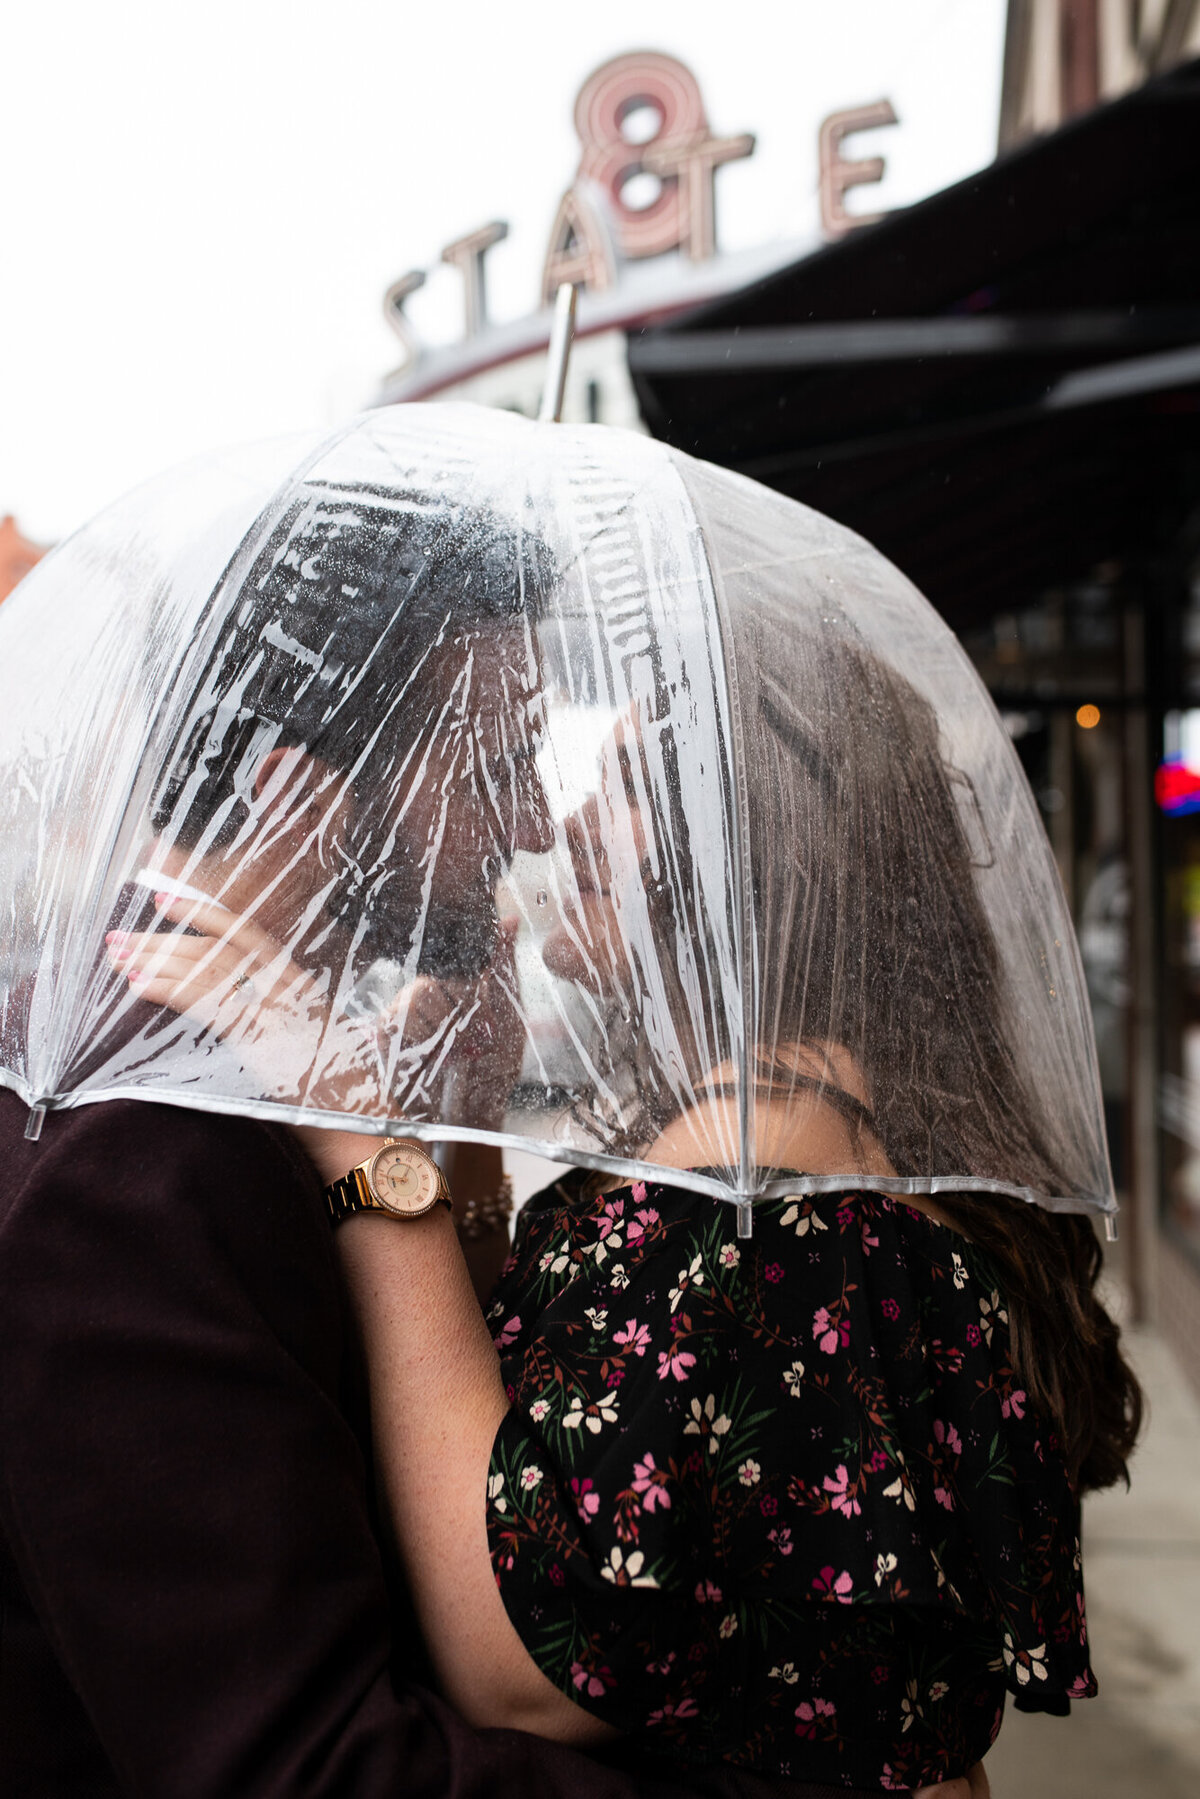 Couple share kiss under umbrella during rainy day engagement session